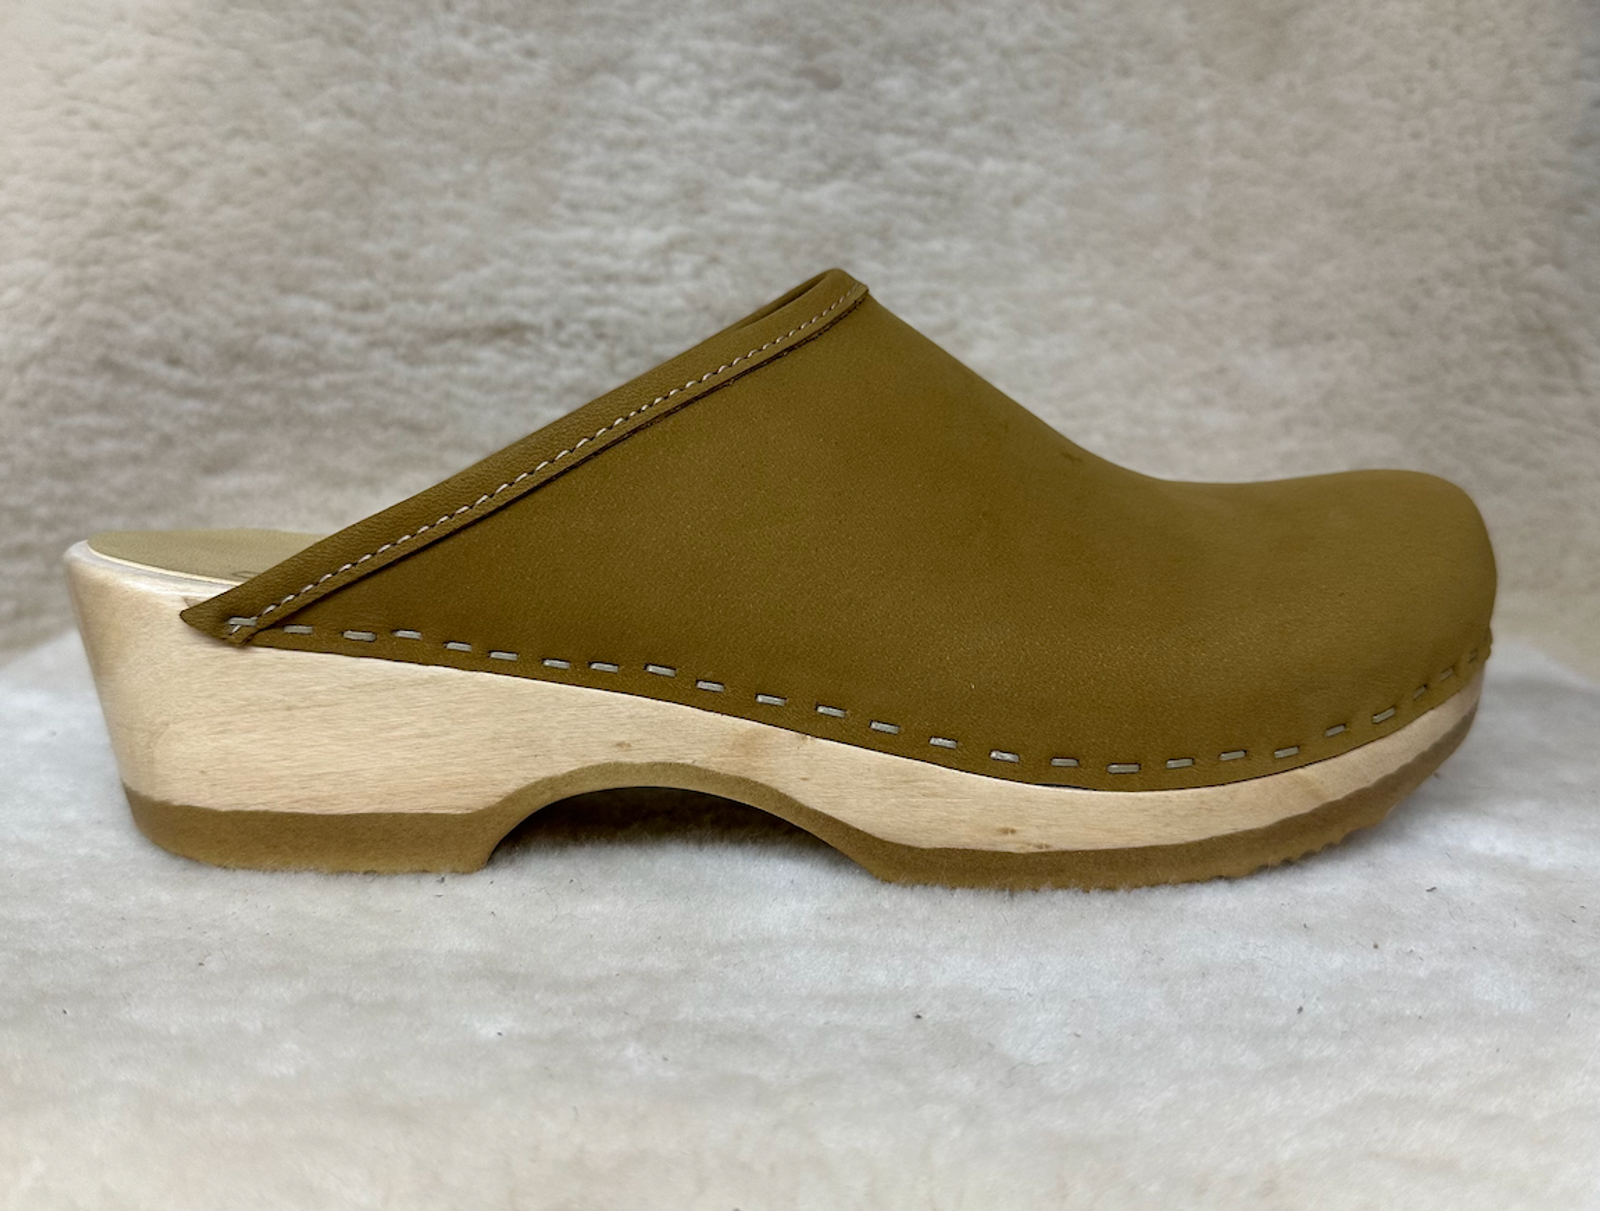 Plain Jane Clogs - With Binding - Goldenrod